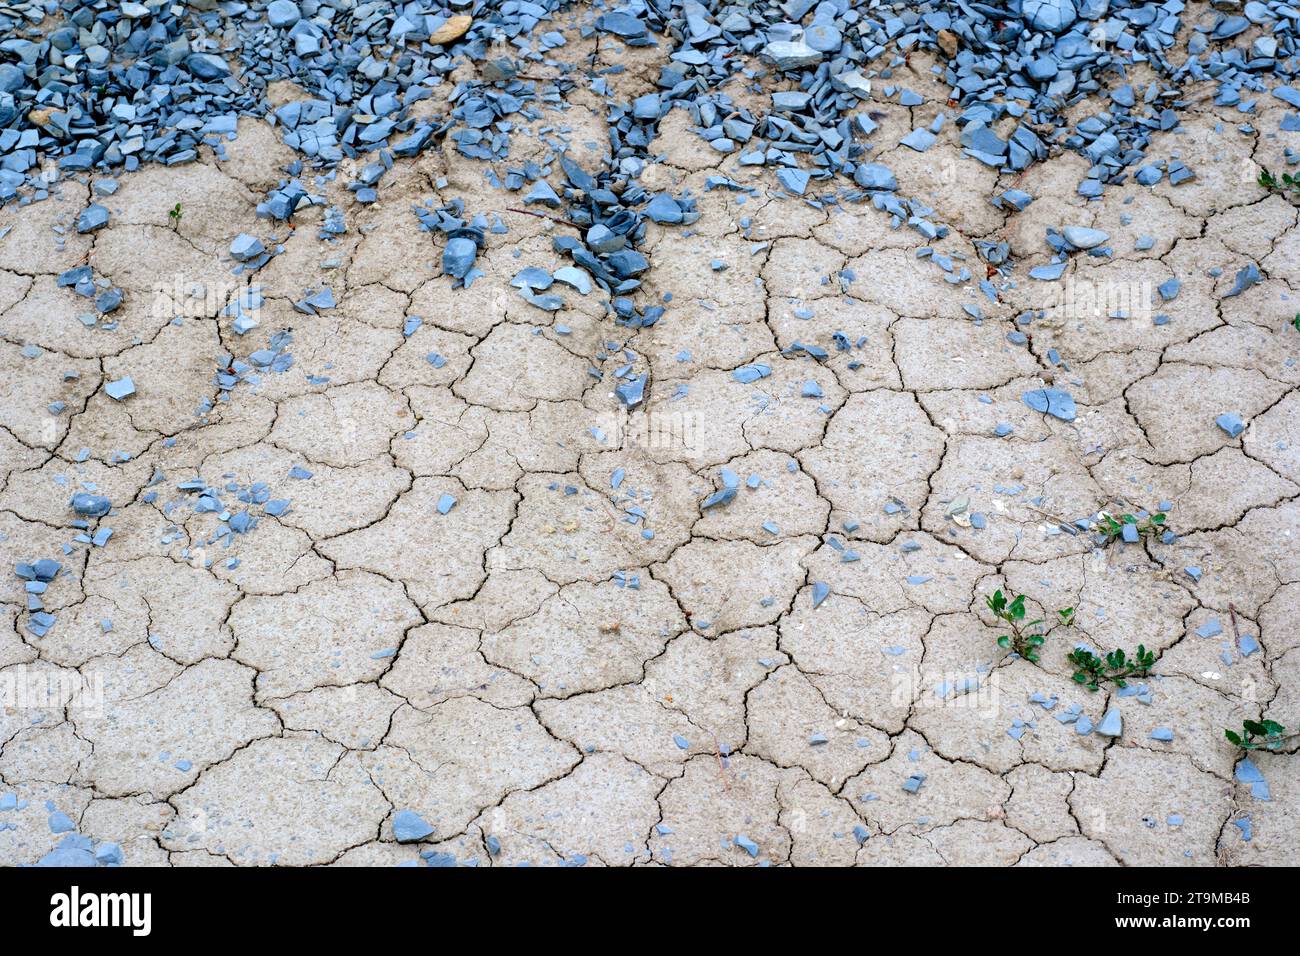 Soil cracked by dry climate. Climate change concept. Stock Photo